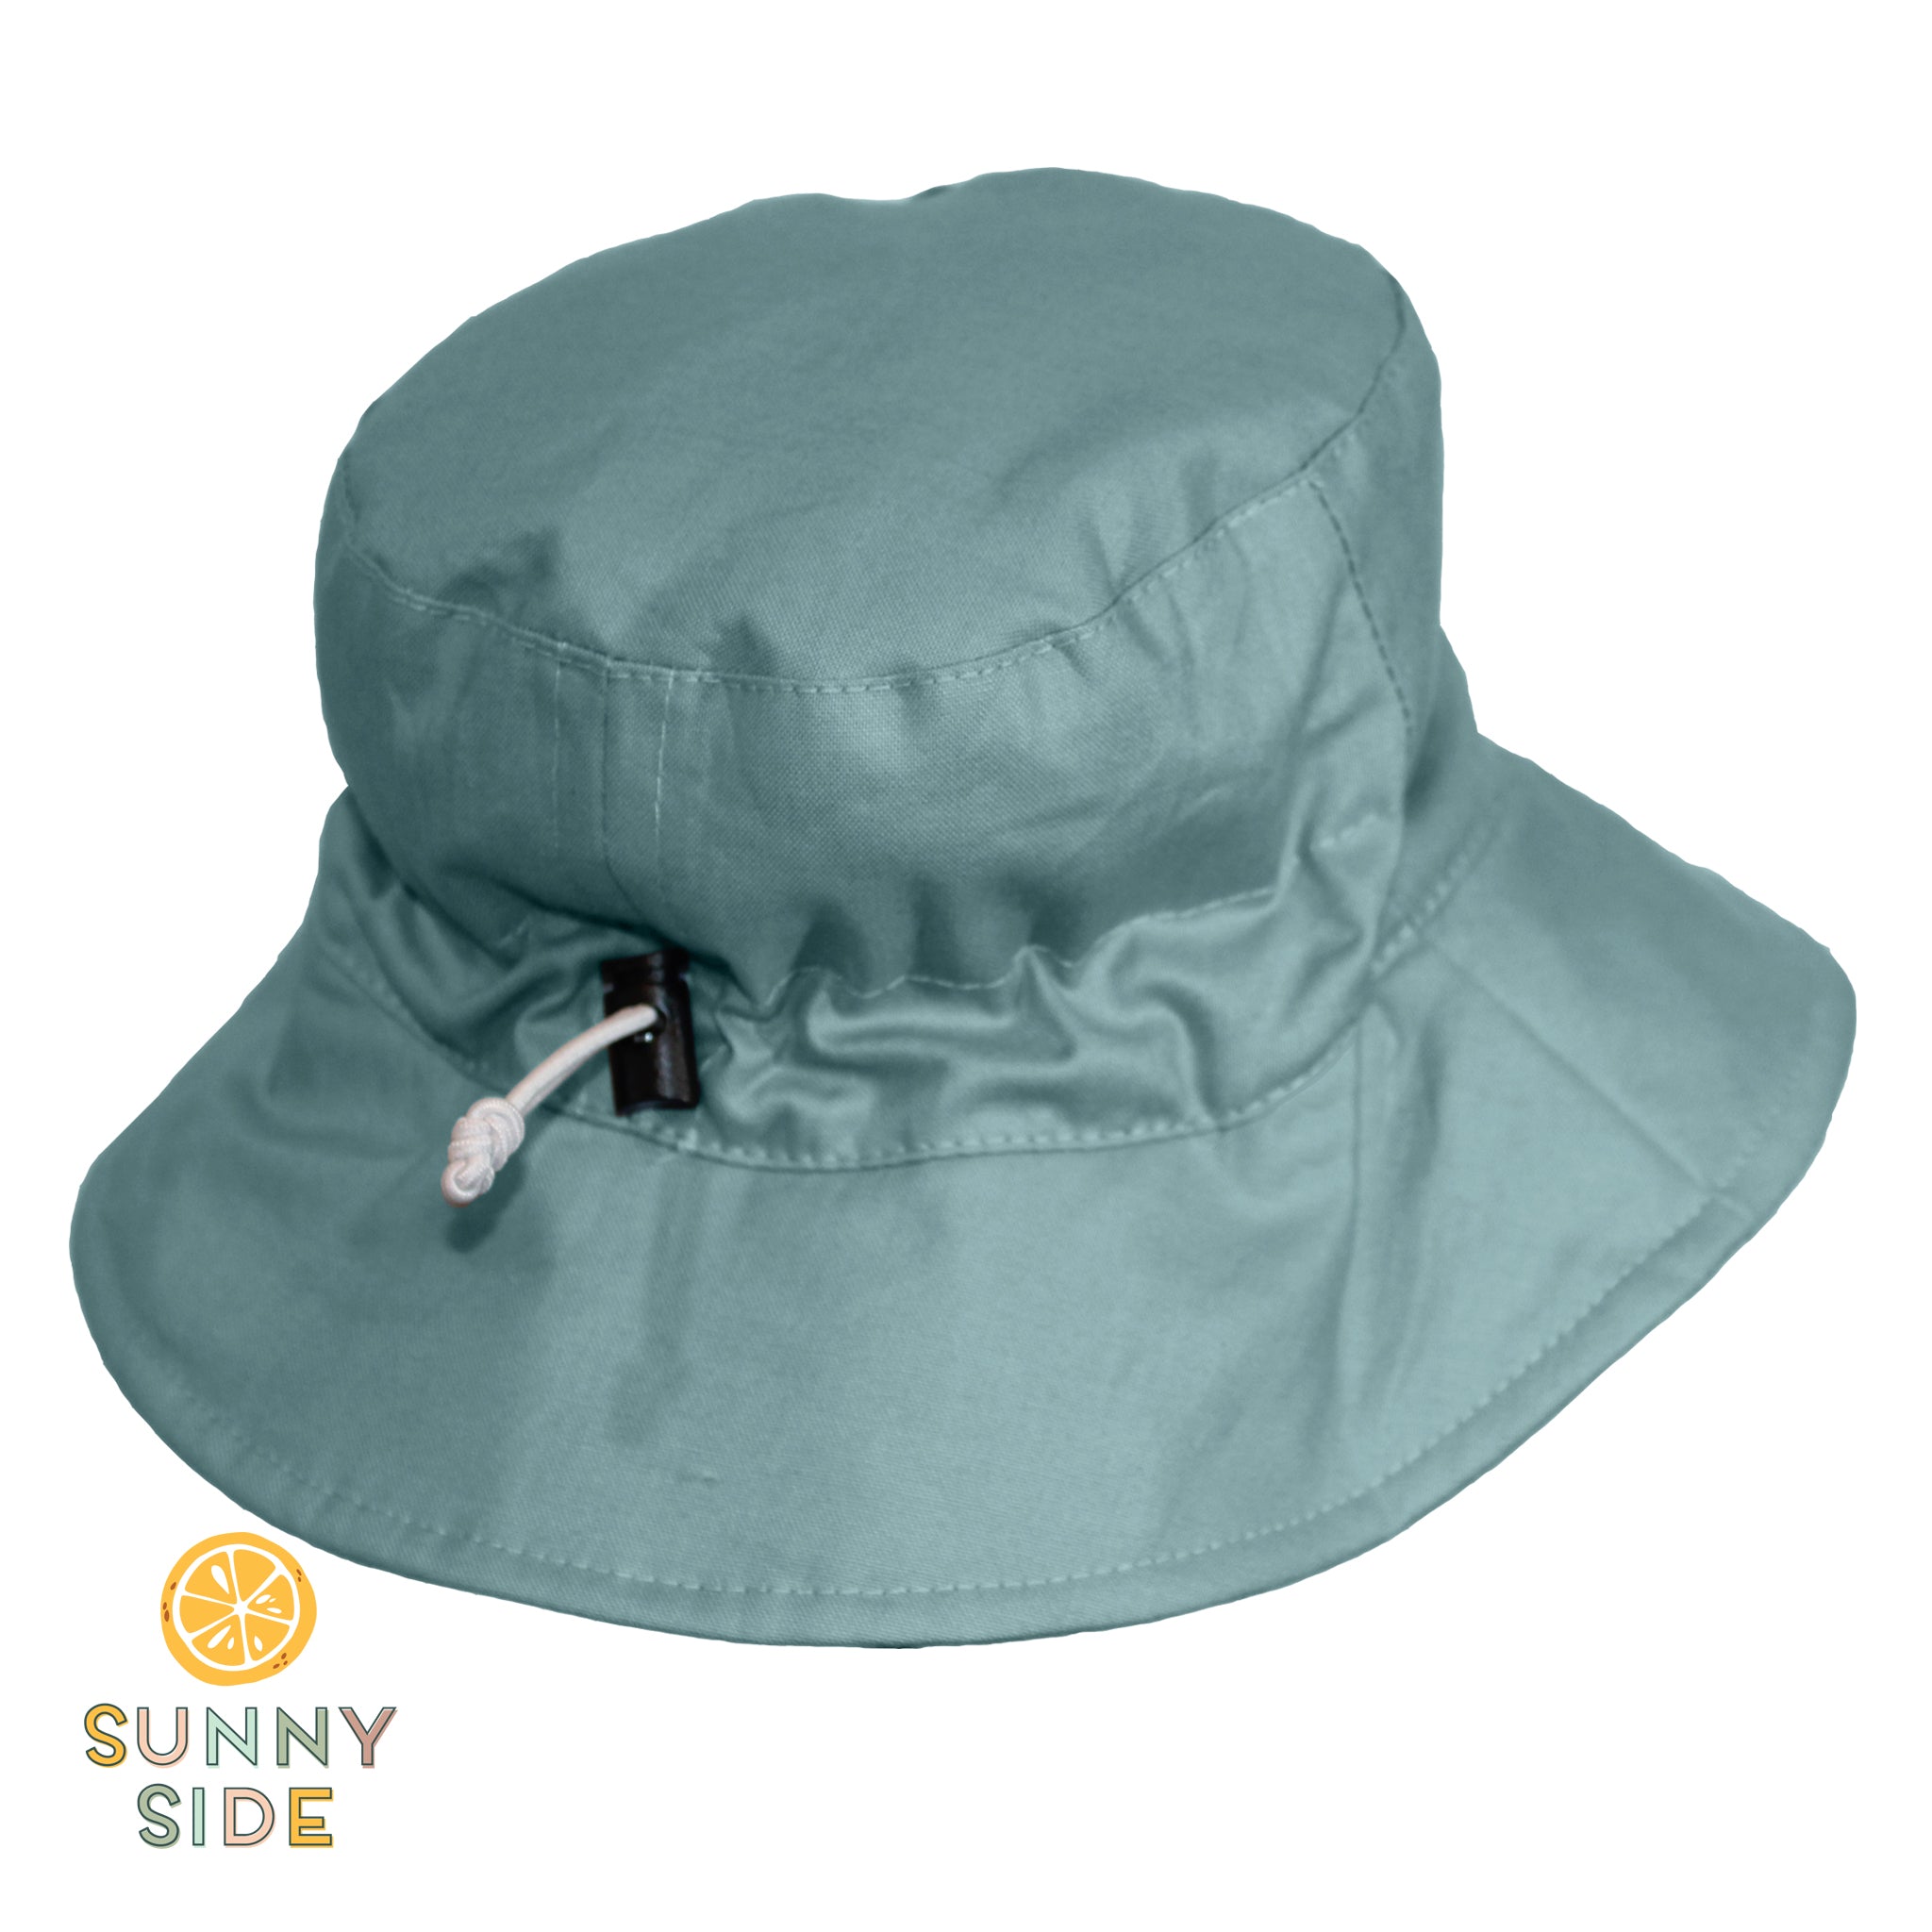 Bucket Hat : made to brighten-up your world! | Sunny Side – Sherpa 